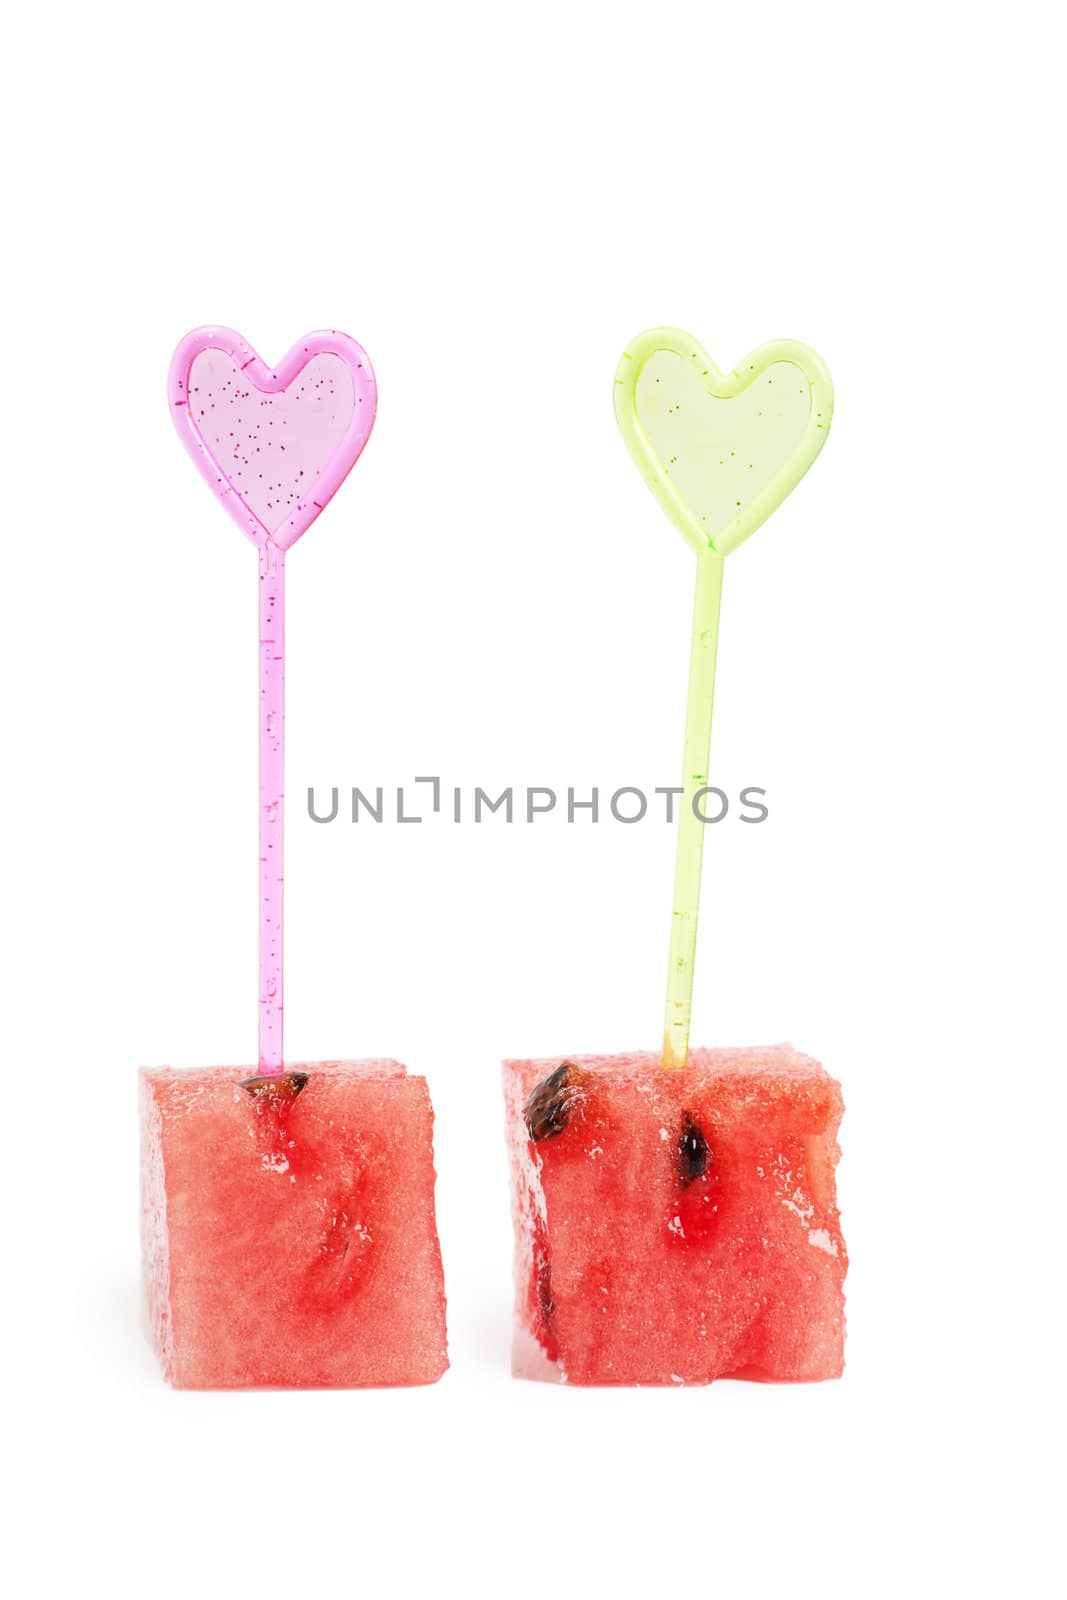 Macro view of fresh watermelon slices with heart-shaped sticks